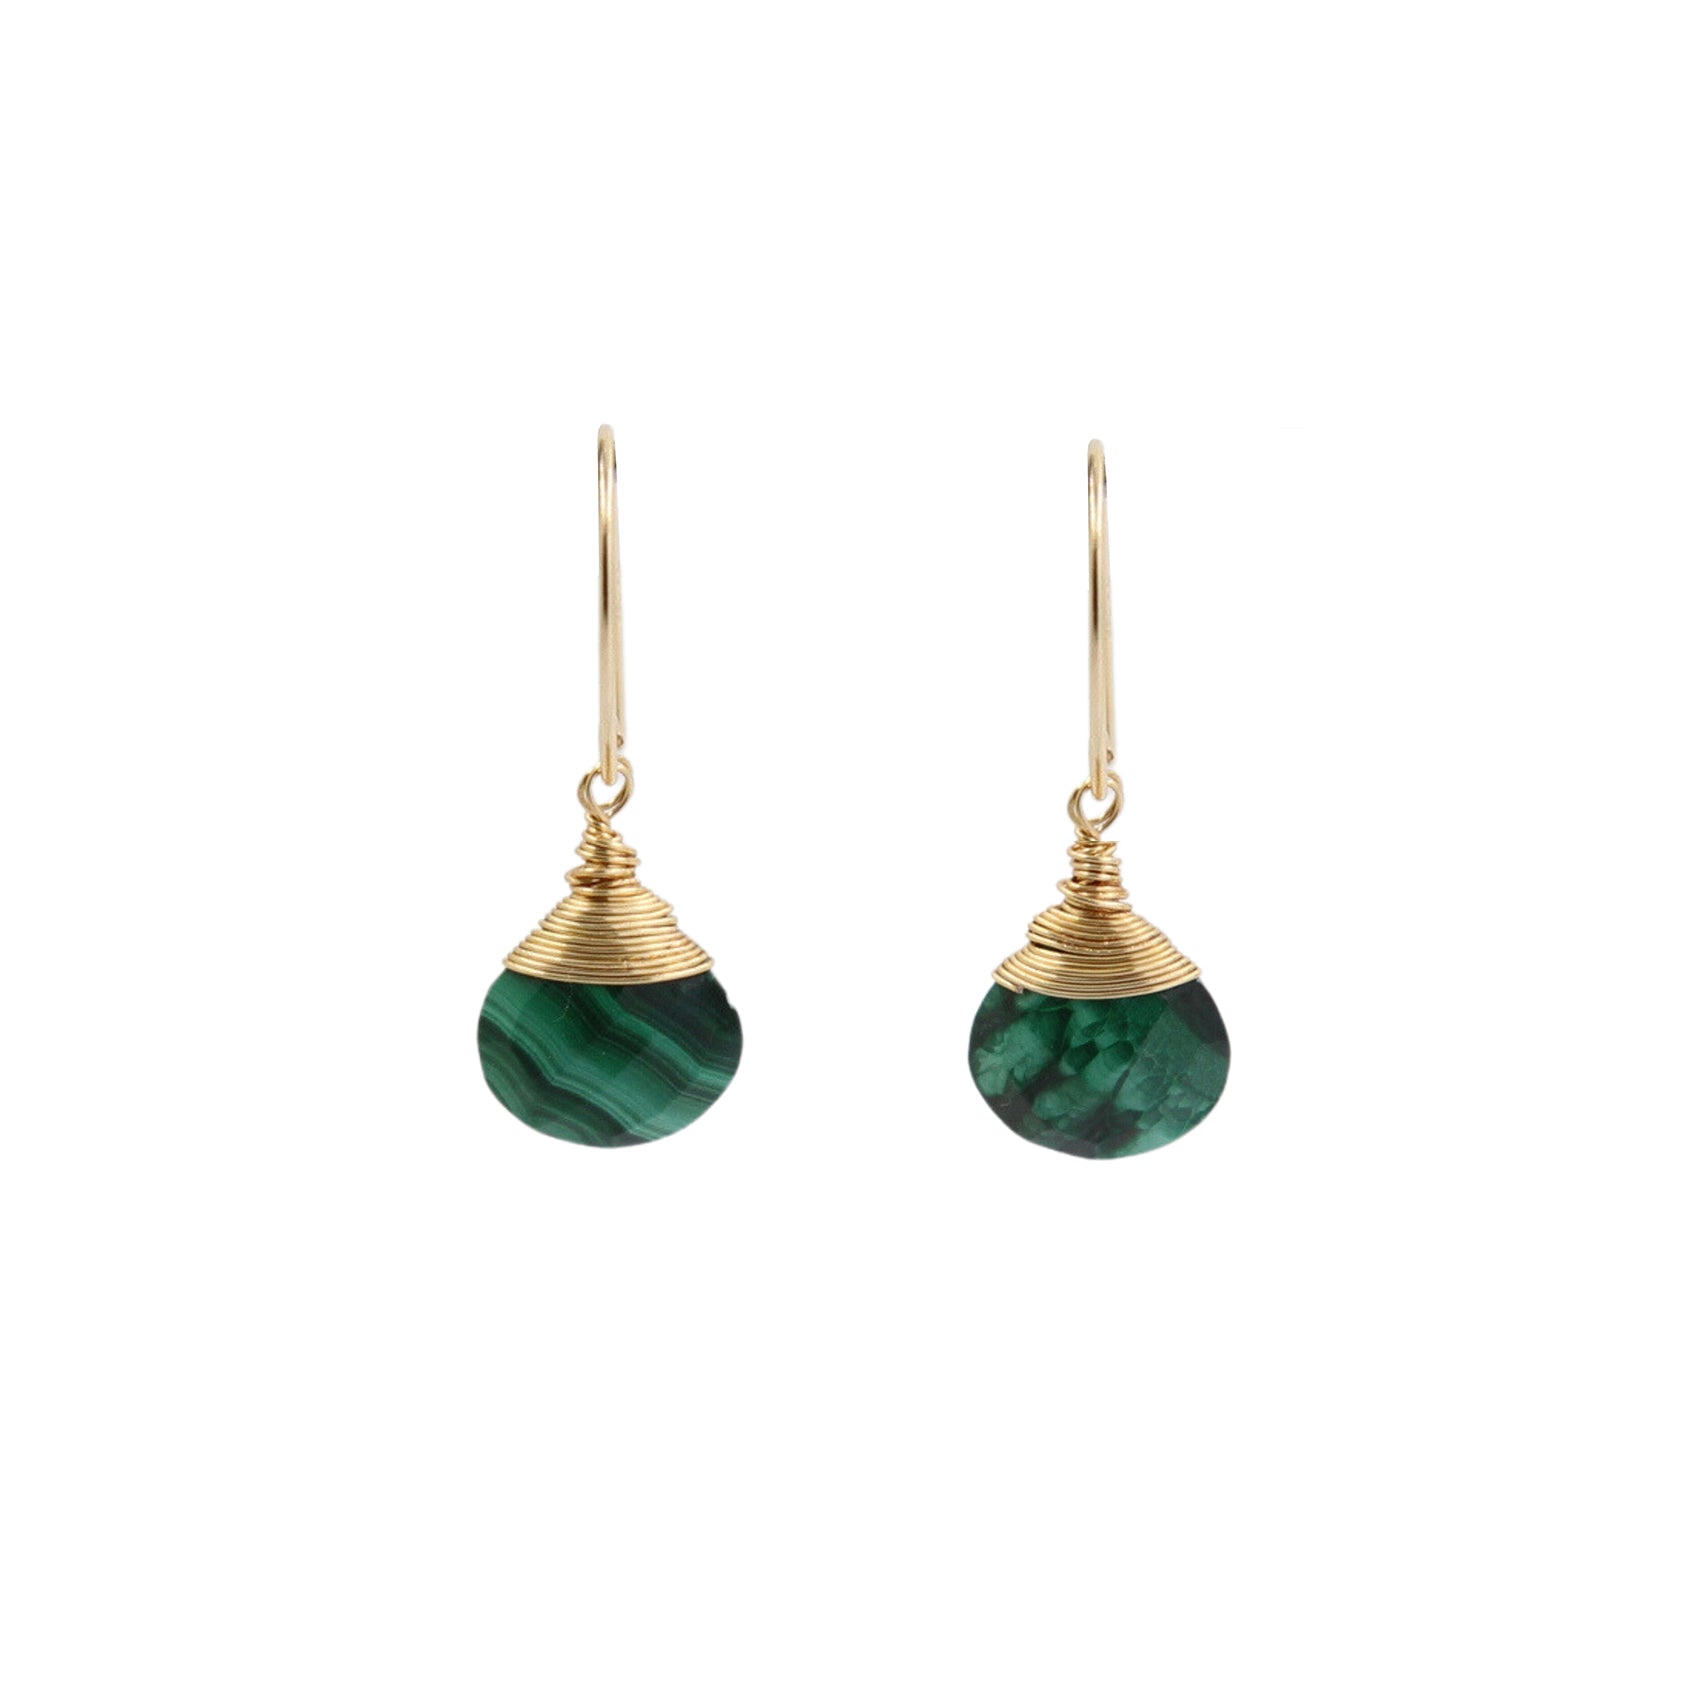 Exquisite "DONNA" Gemstone Drop Earrings by Gosia Orlowska